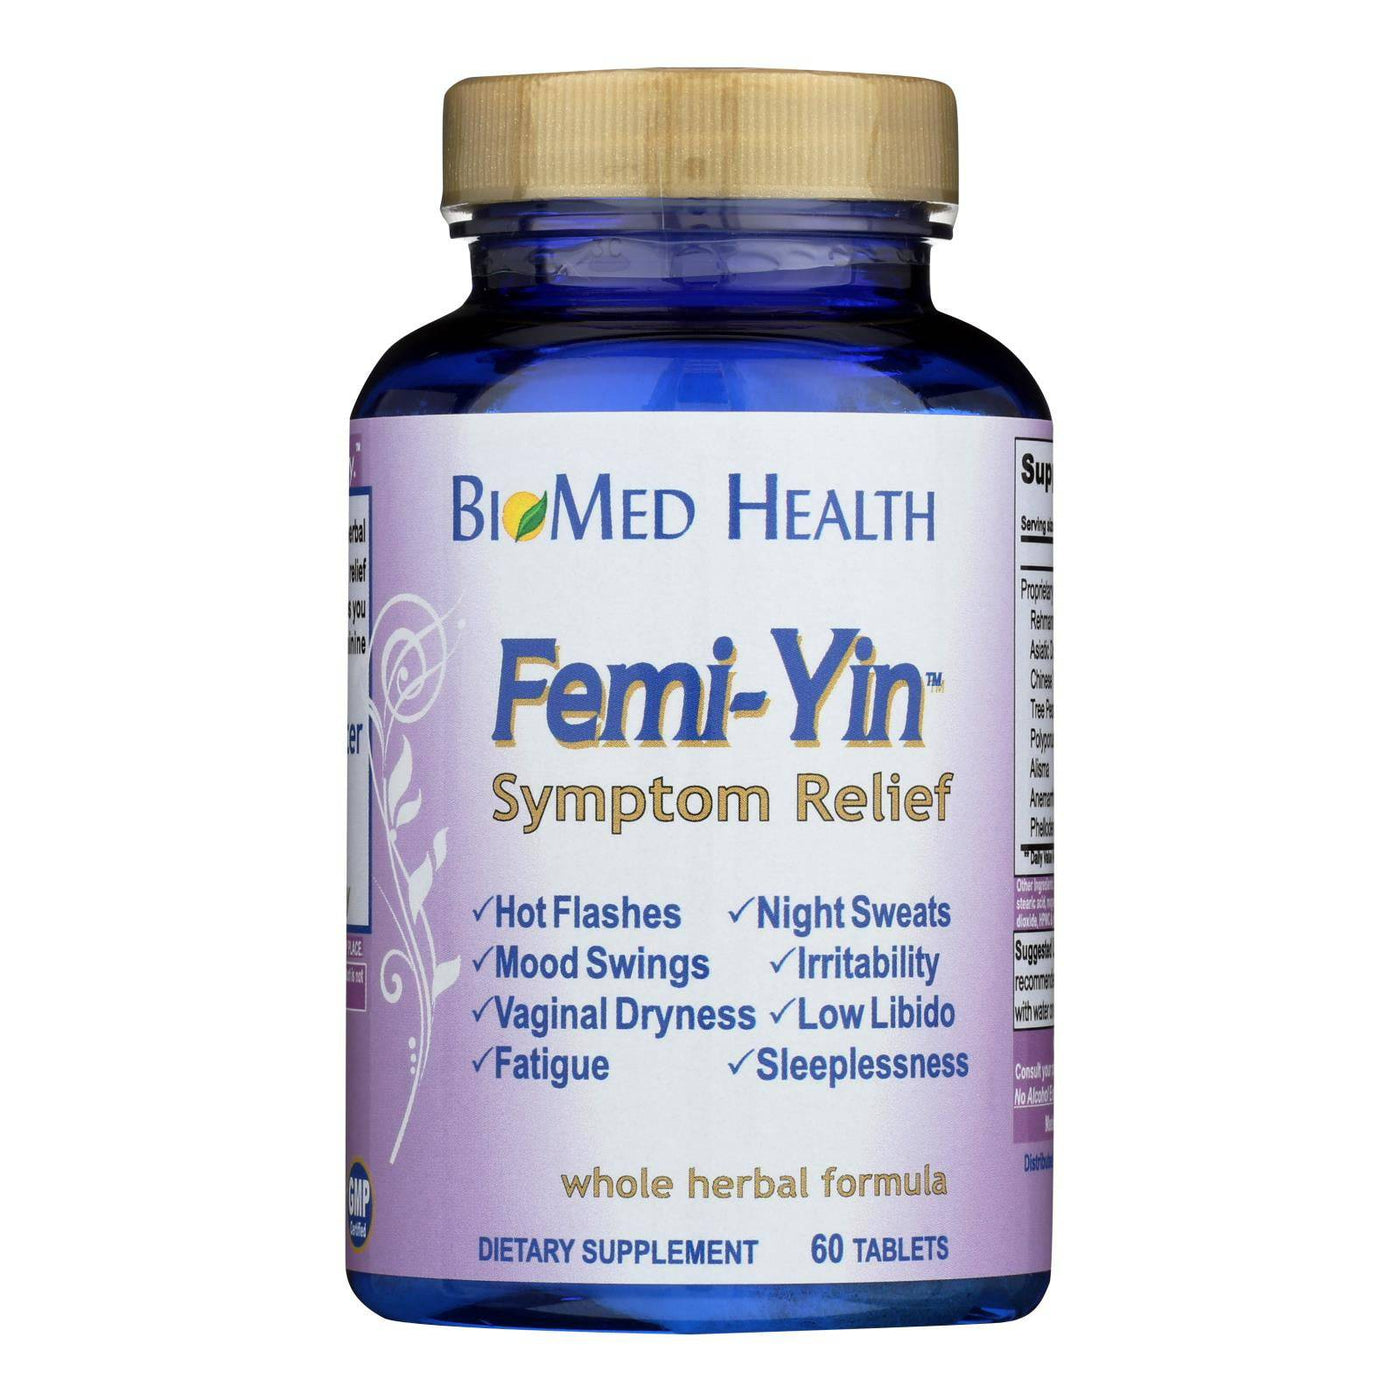 Buy Biomed Health Femi-yin Peri And Menopause Relief - 60 Capsules  at OnlyNaturals.us